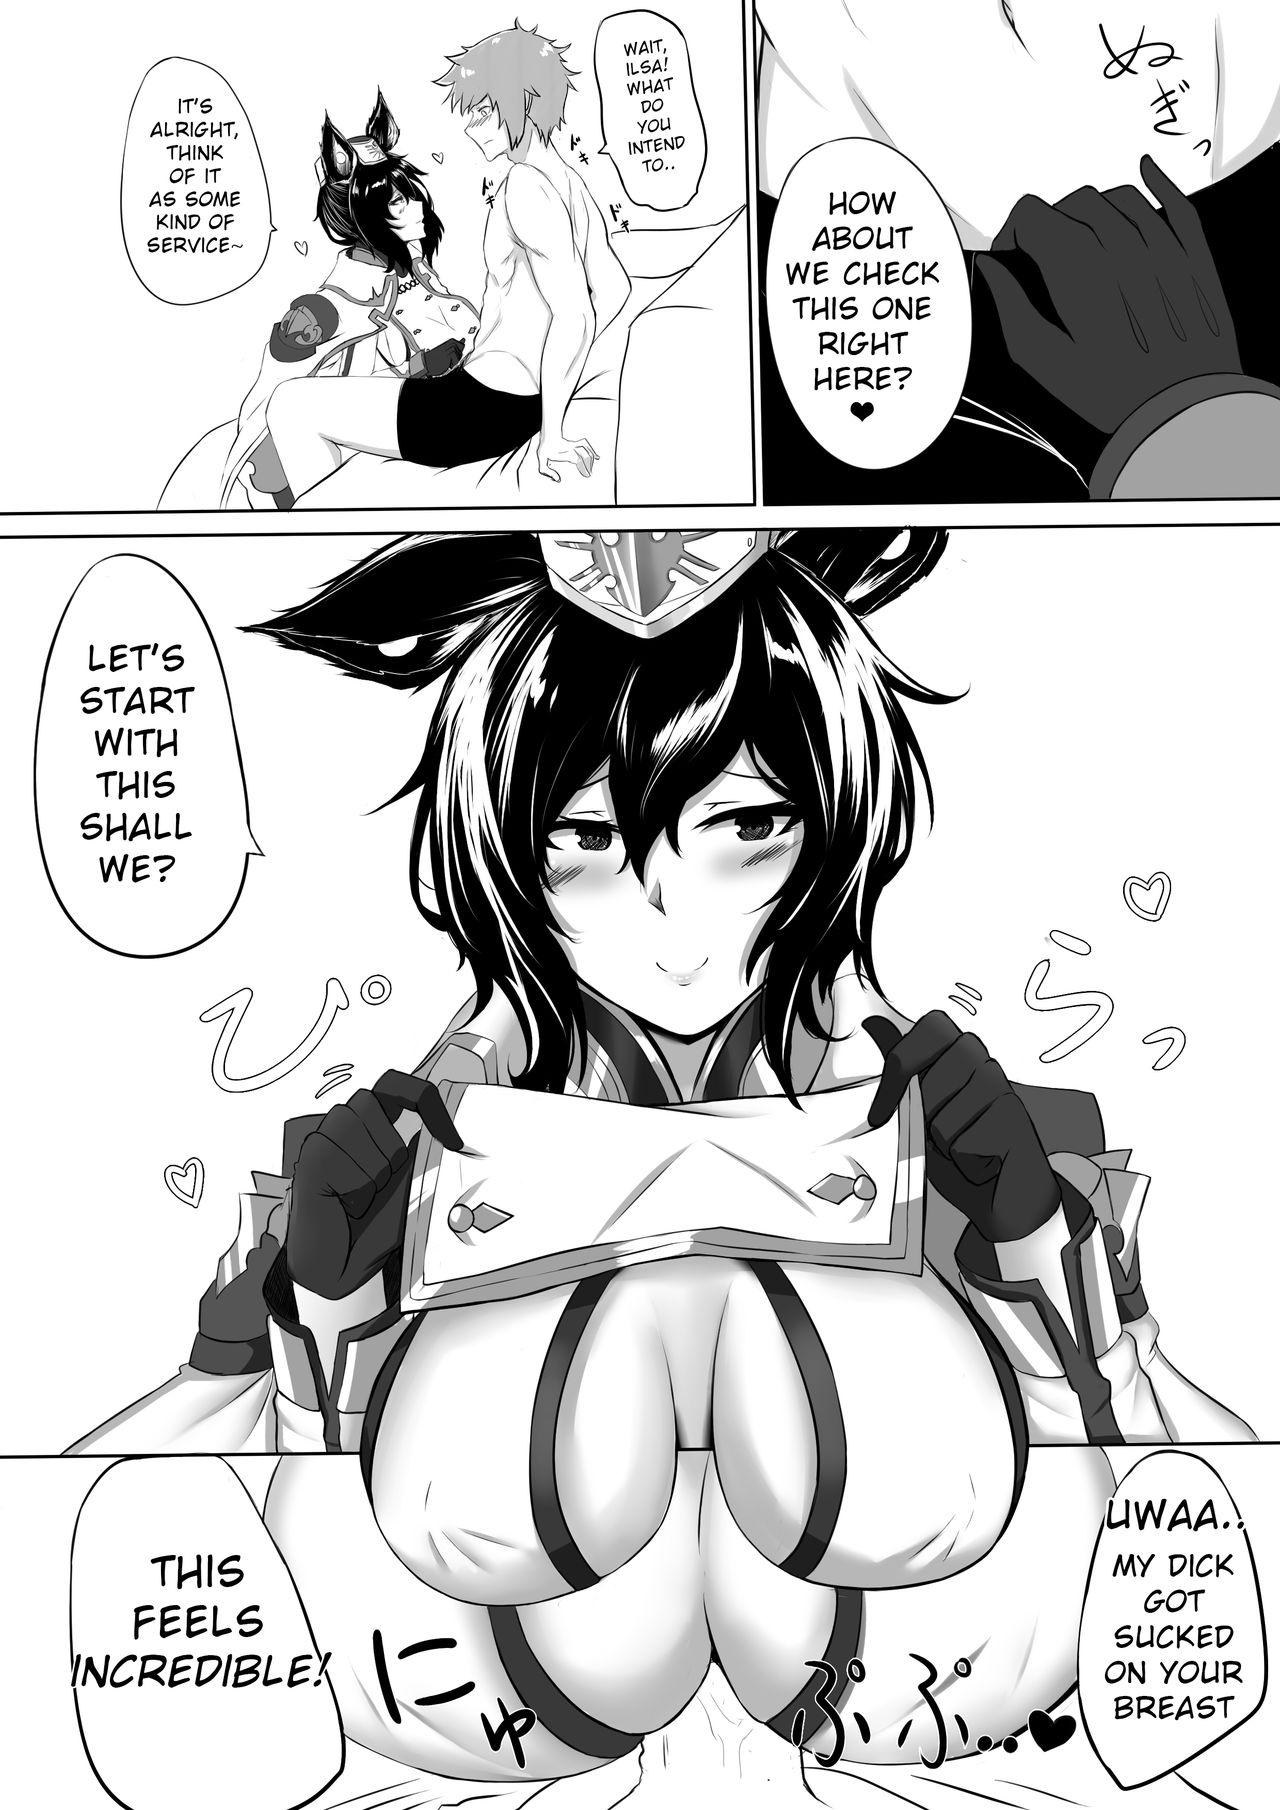 Africa BREAK TIME - Granblue fantasy Homosexual - Page 4